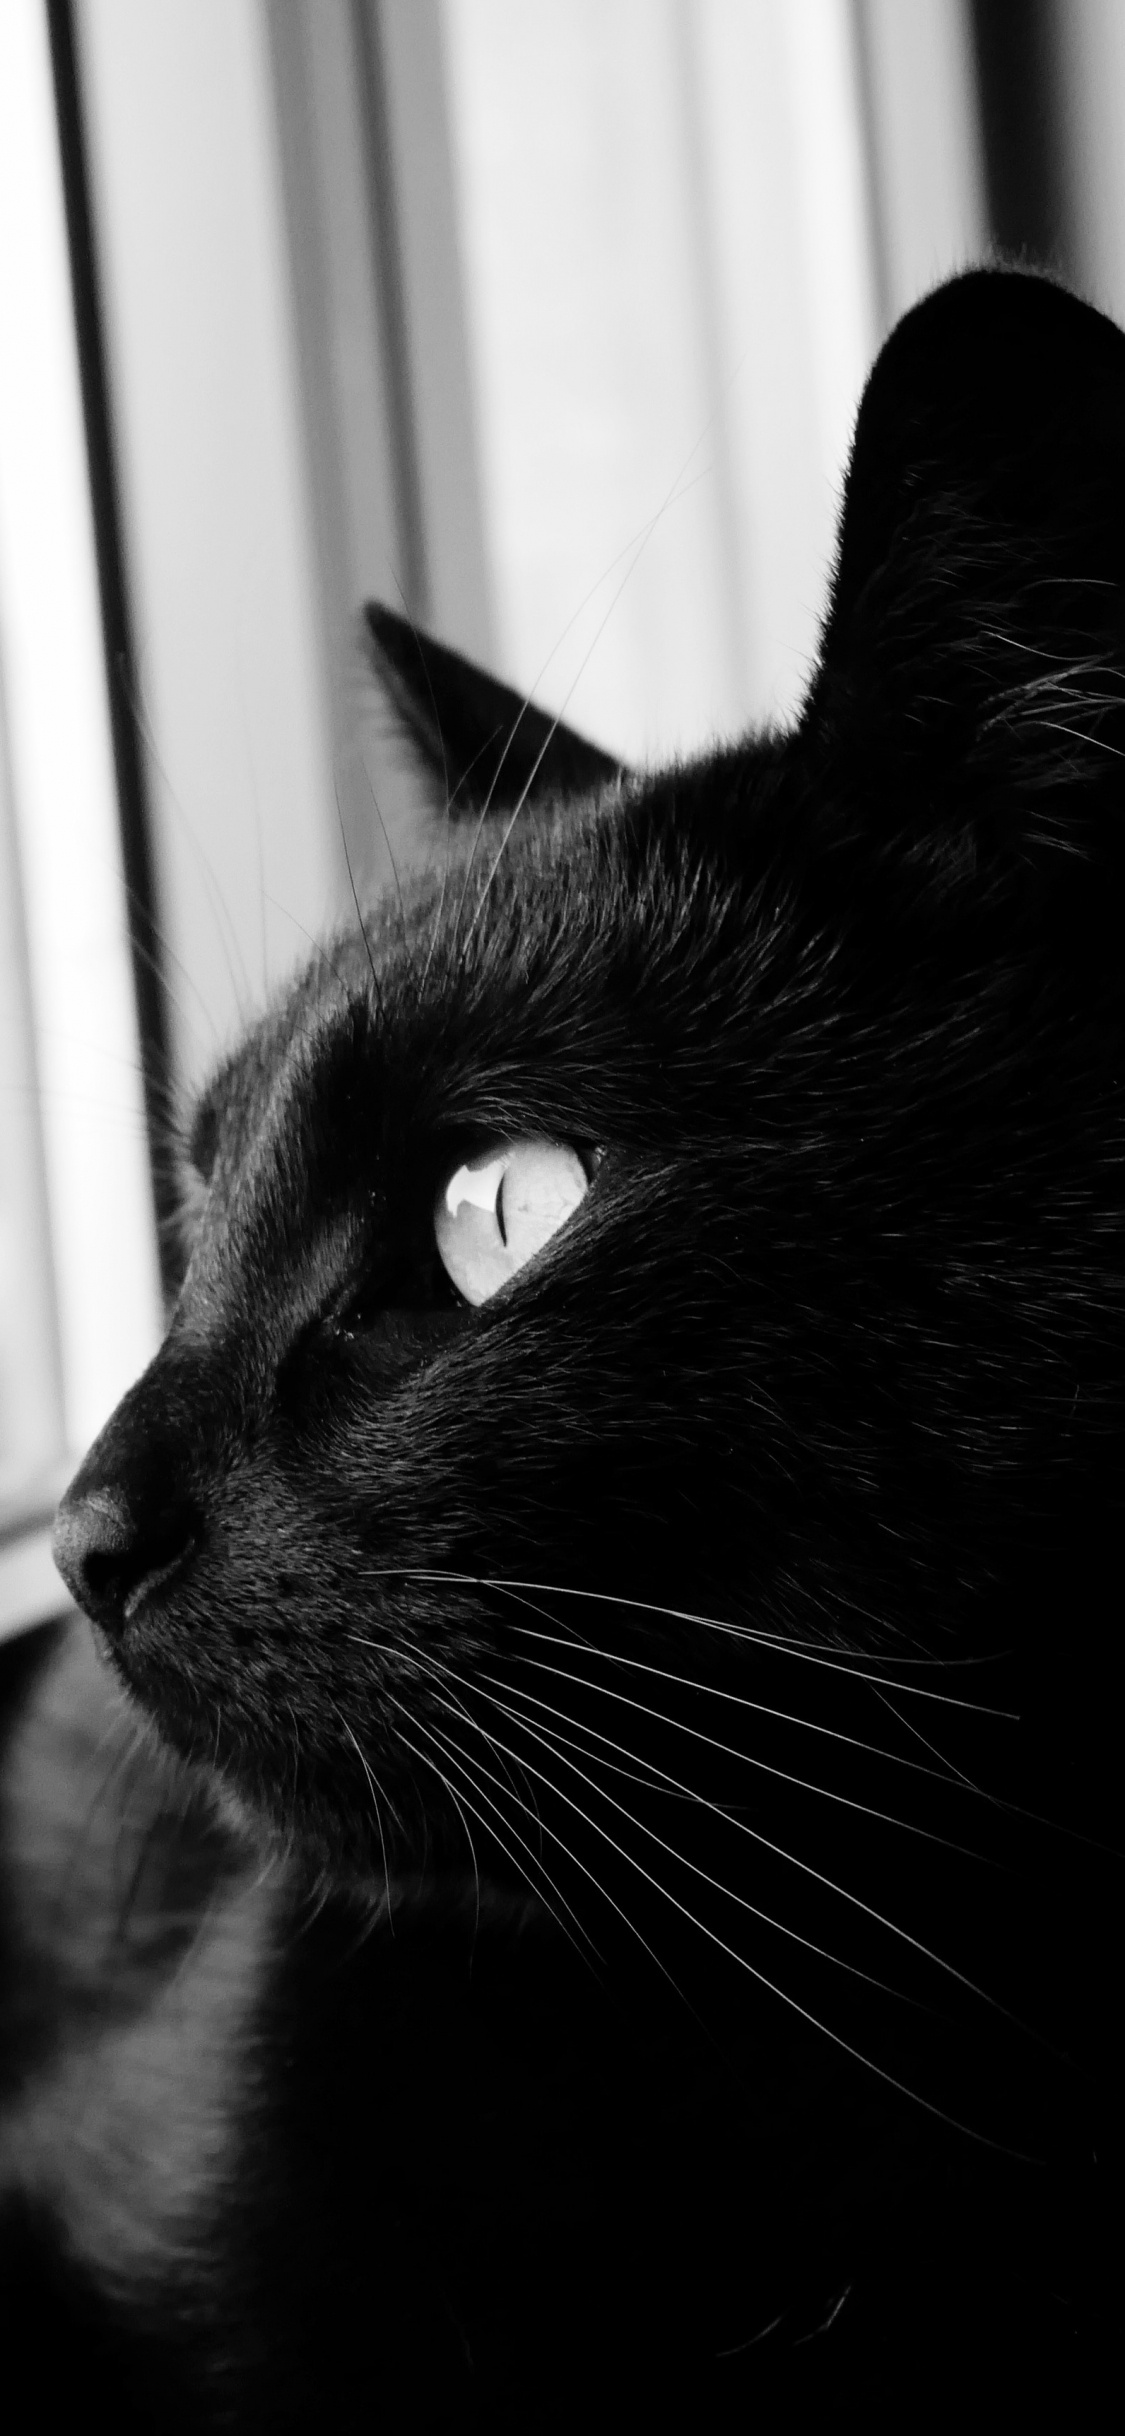 Black Cat Looking at The Window. Wallpaper in 1125x2436 Resolution